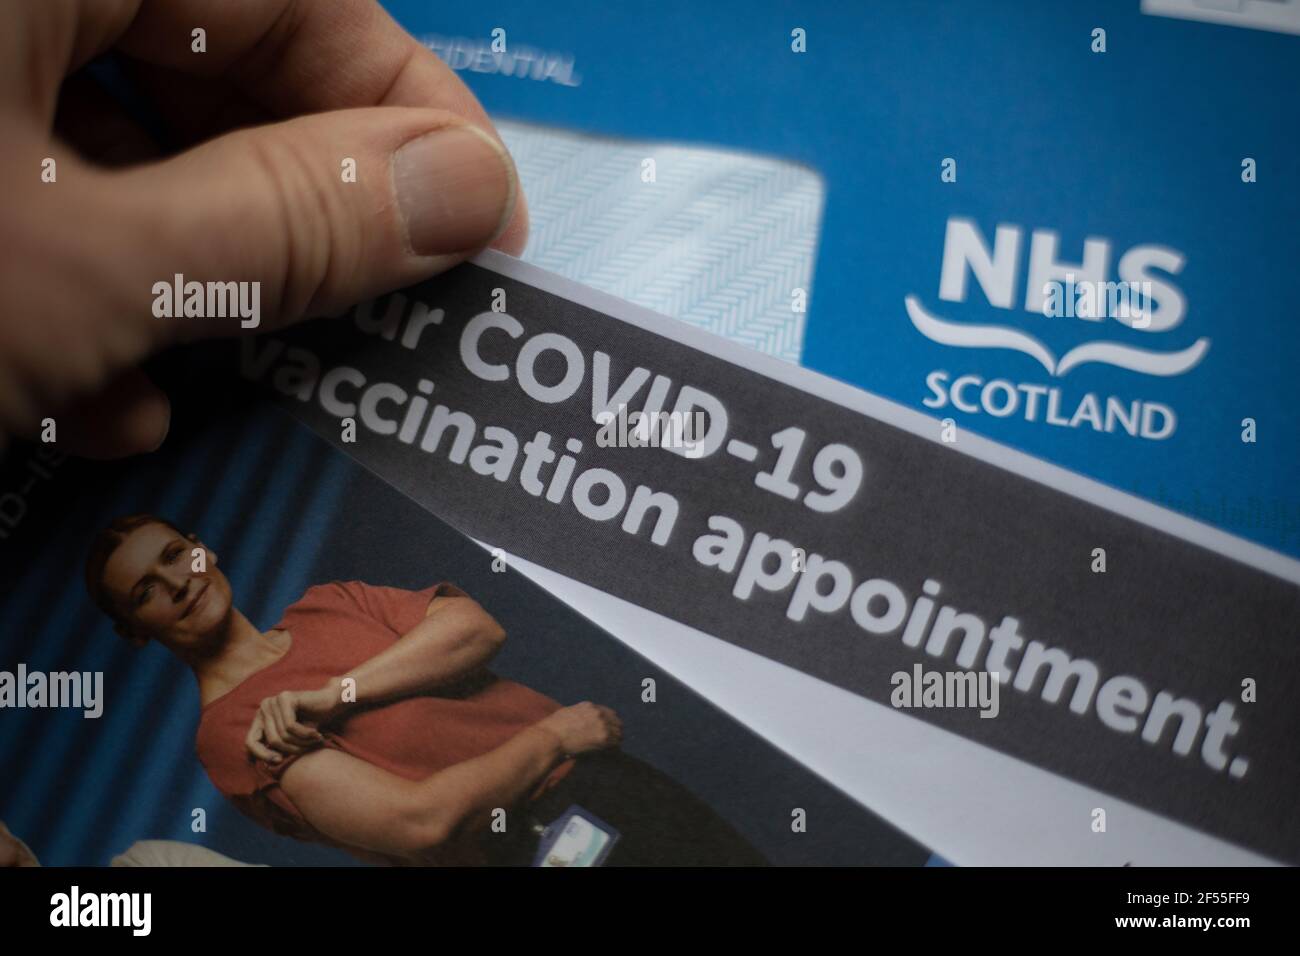 Glasgow, UK, on 24 March 2021. An NHS Scotland Covid-19 vaccination appointment letter is read by the receiver. Over 2 million people in Scotland have now had their first dose of the Covid-19 CoronaVirus vaccination. Photo credit: Jeremy Sutton-Hibbert/ Alamy Live News. Stock Photo